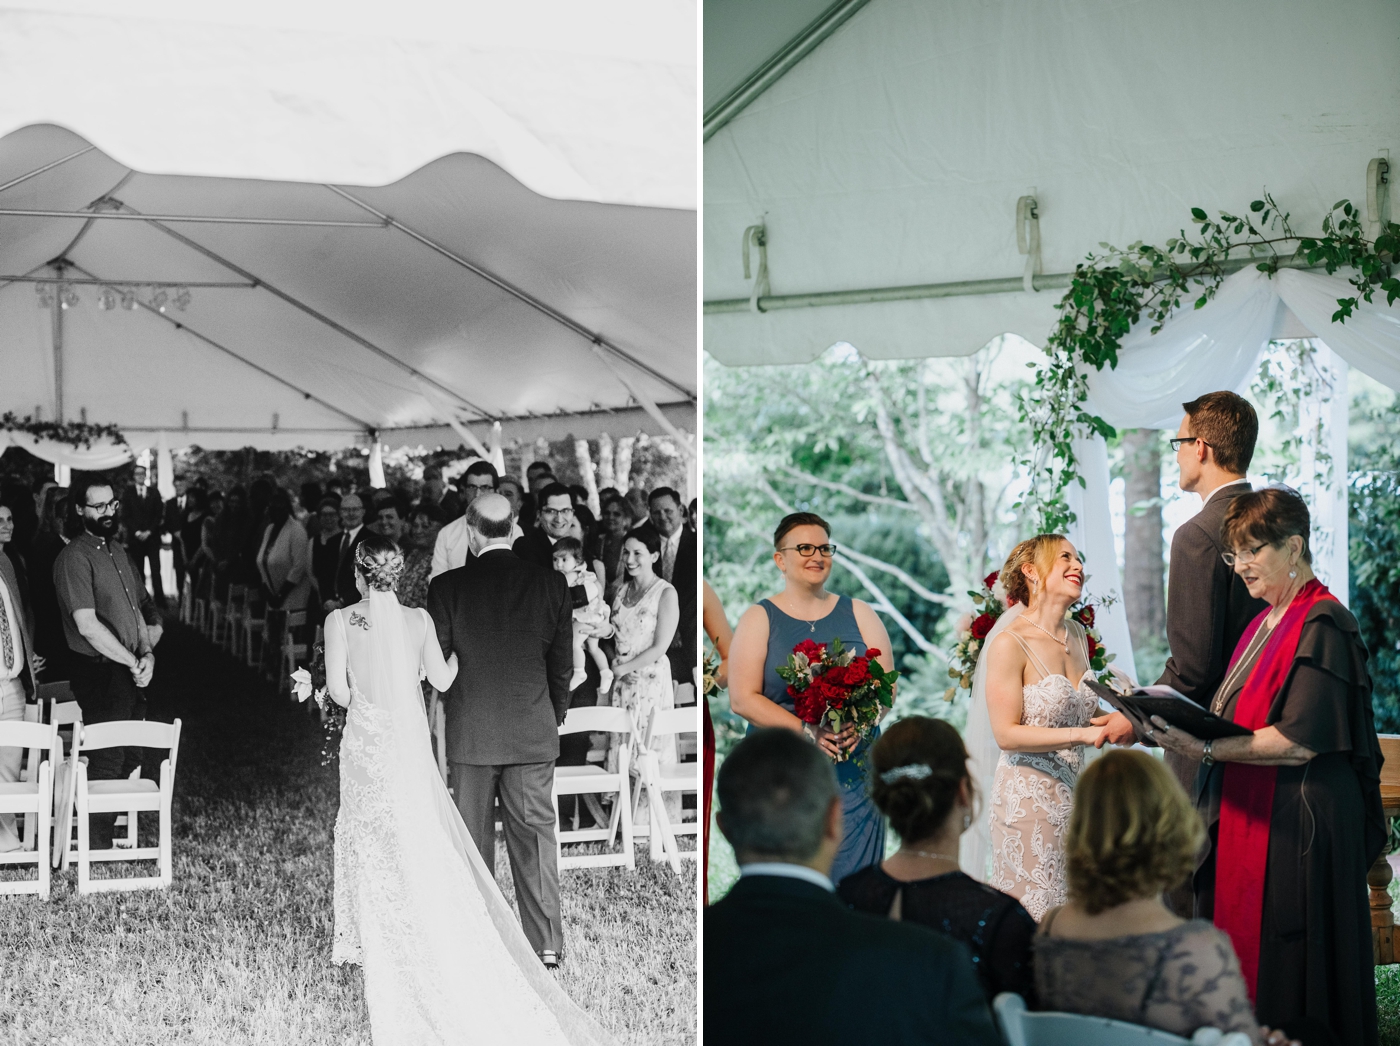 Alyssa and Chris’s Summer wedding in Chapel Hill at Fearrington Village | Izzy and Co.